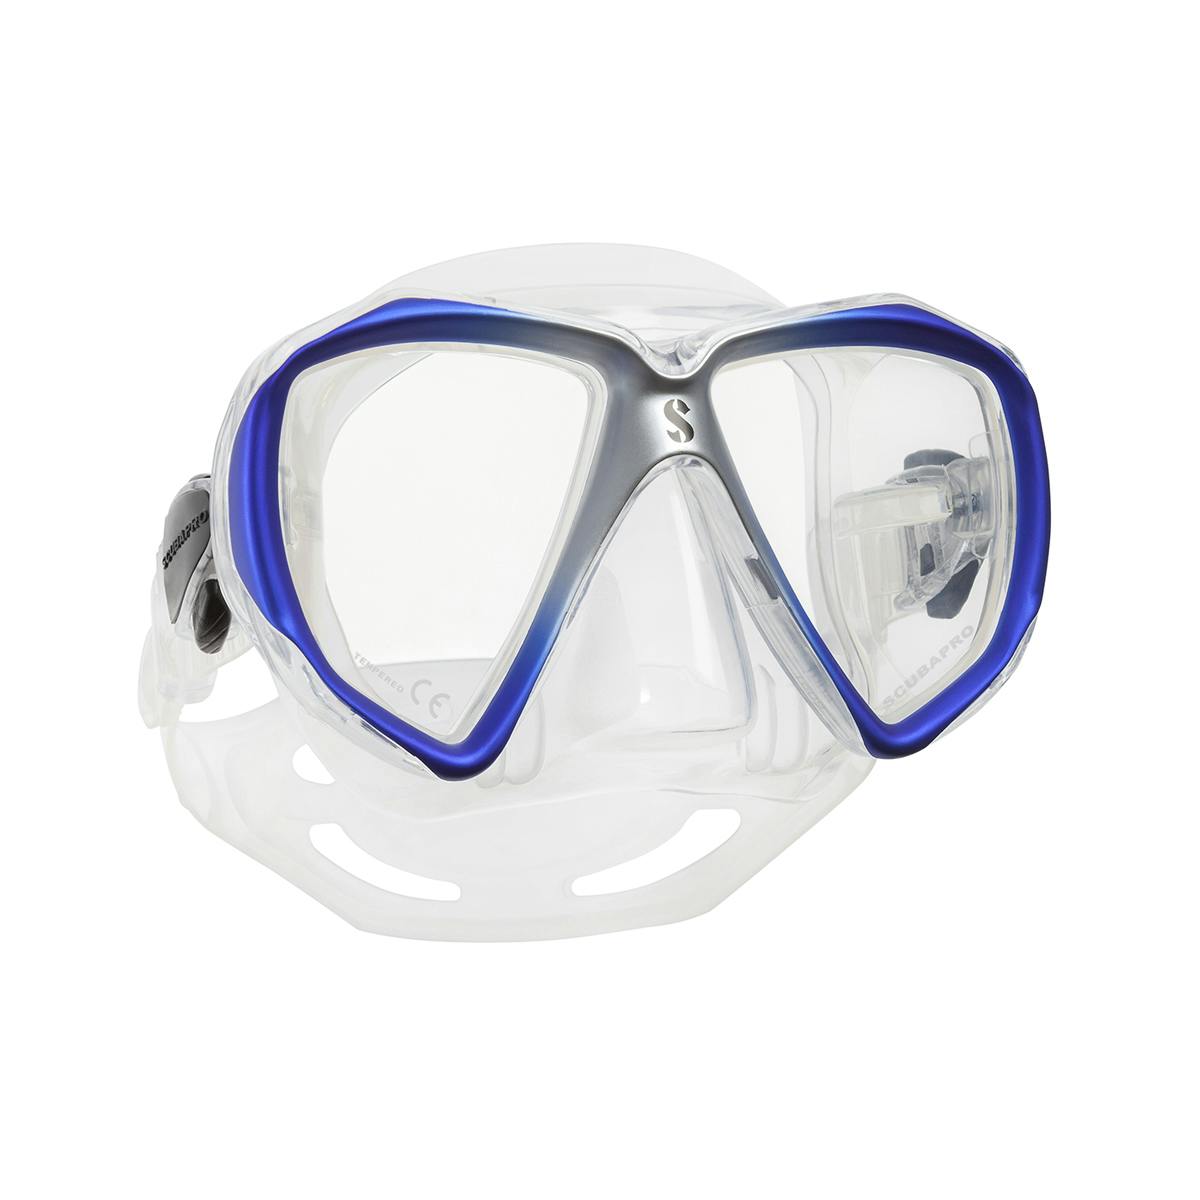 ScubaPro Spectra Mask, Two Lens - Clear/Silver/Blue